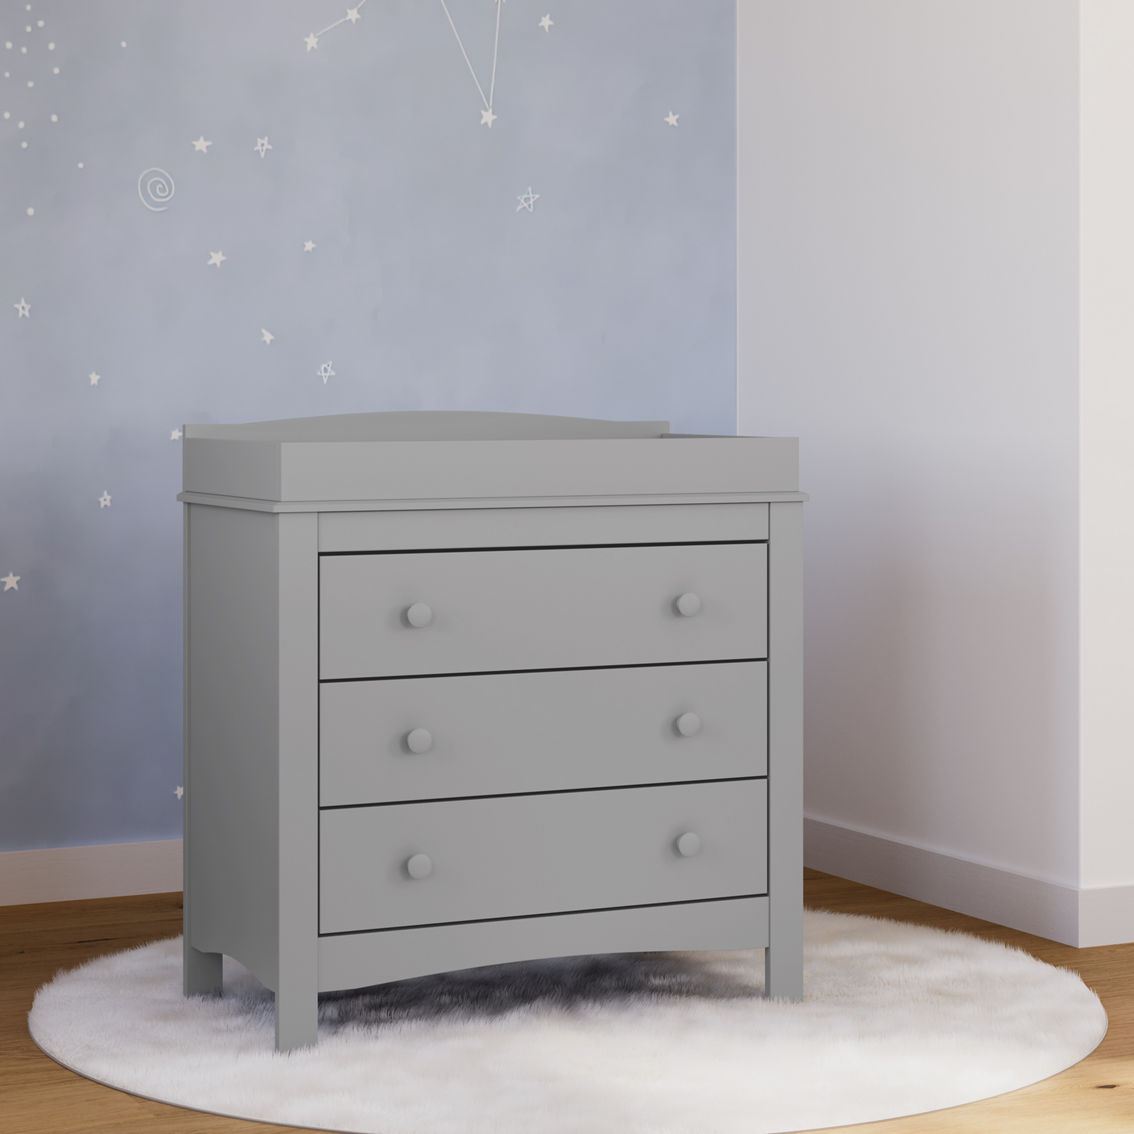 Graco Noah 3 Drawer Chest with Changing Topper - Image 9 of 9